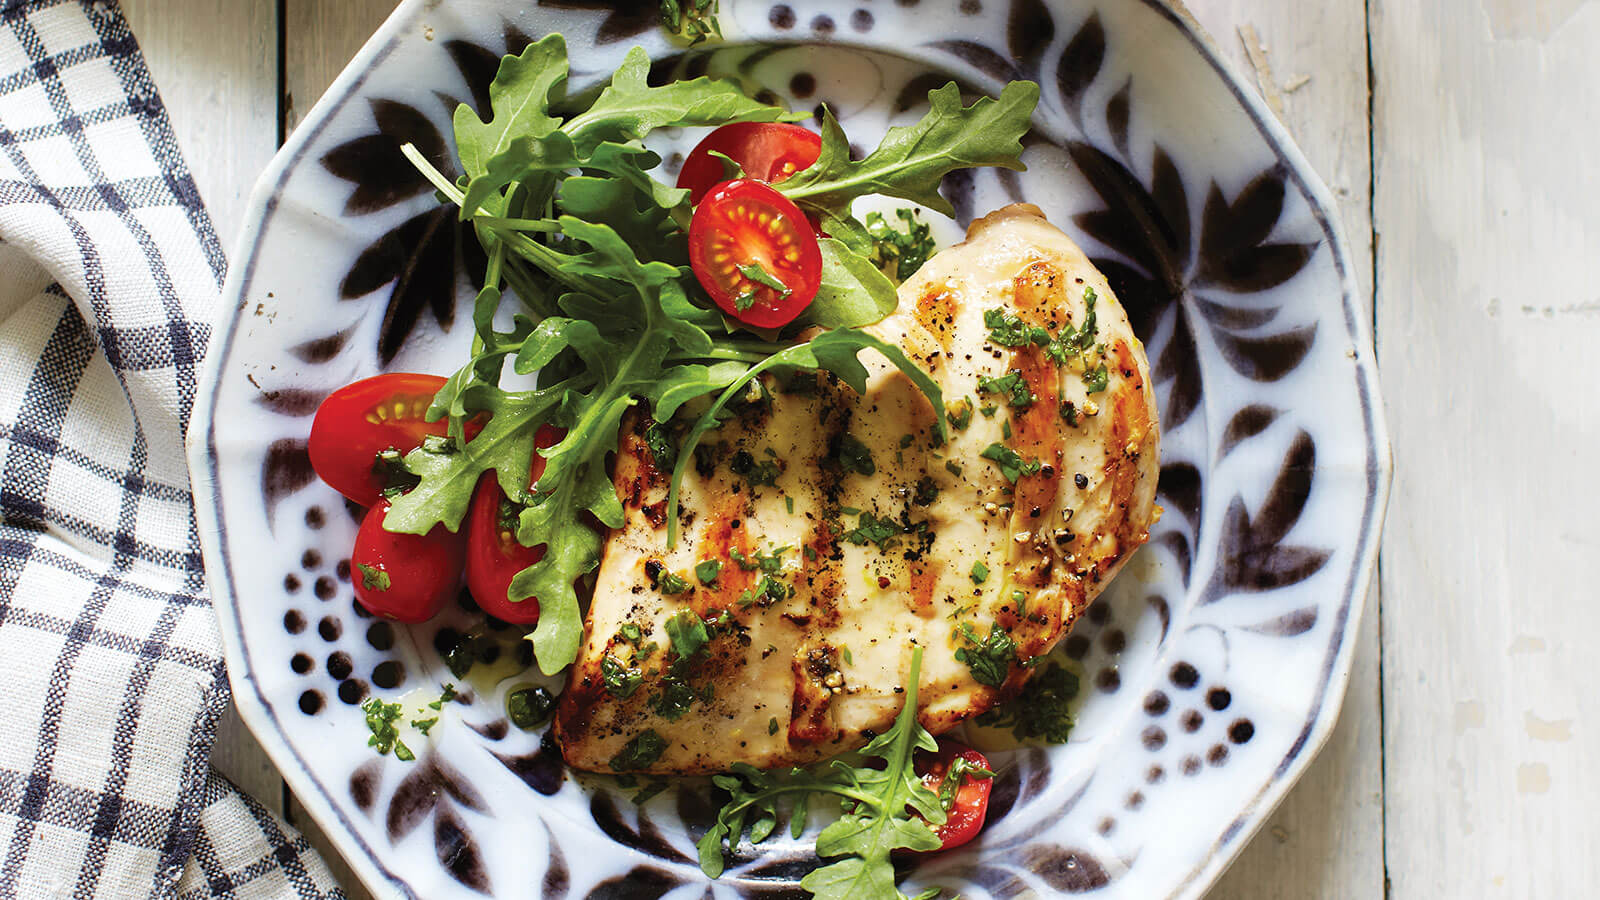 Marinated Chicken With Basil Drizzle